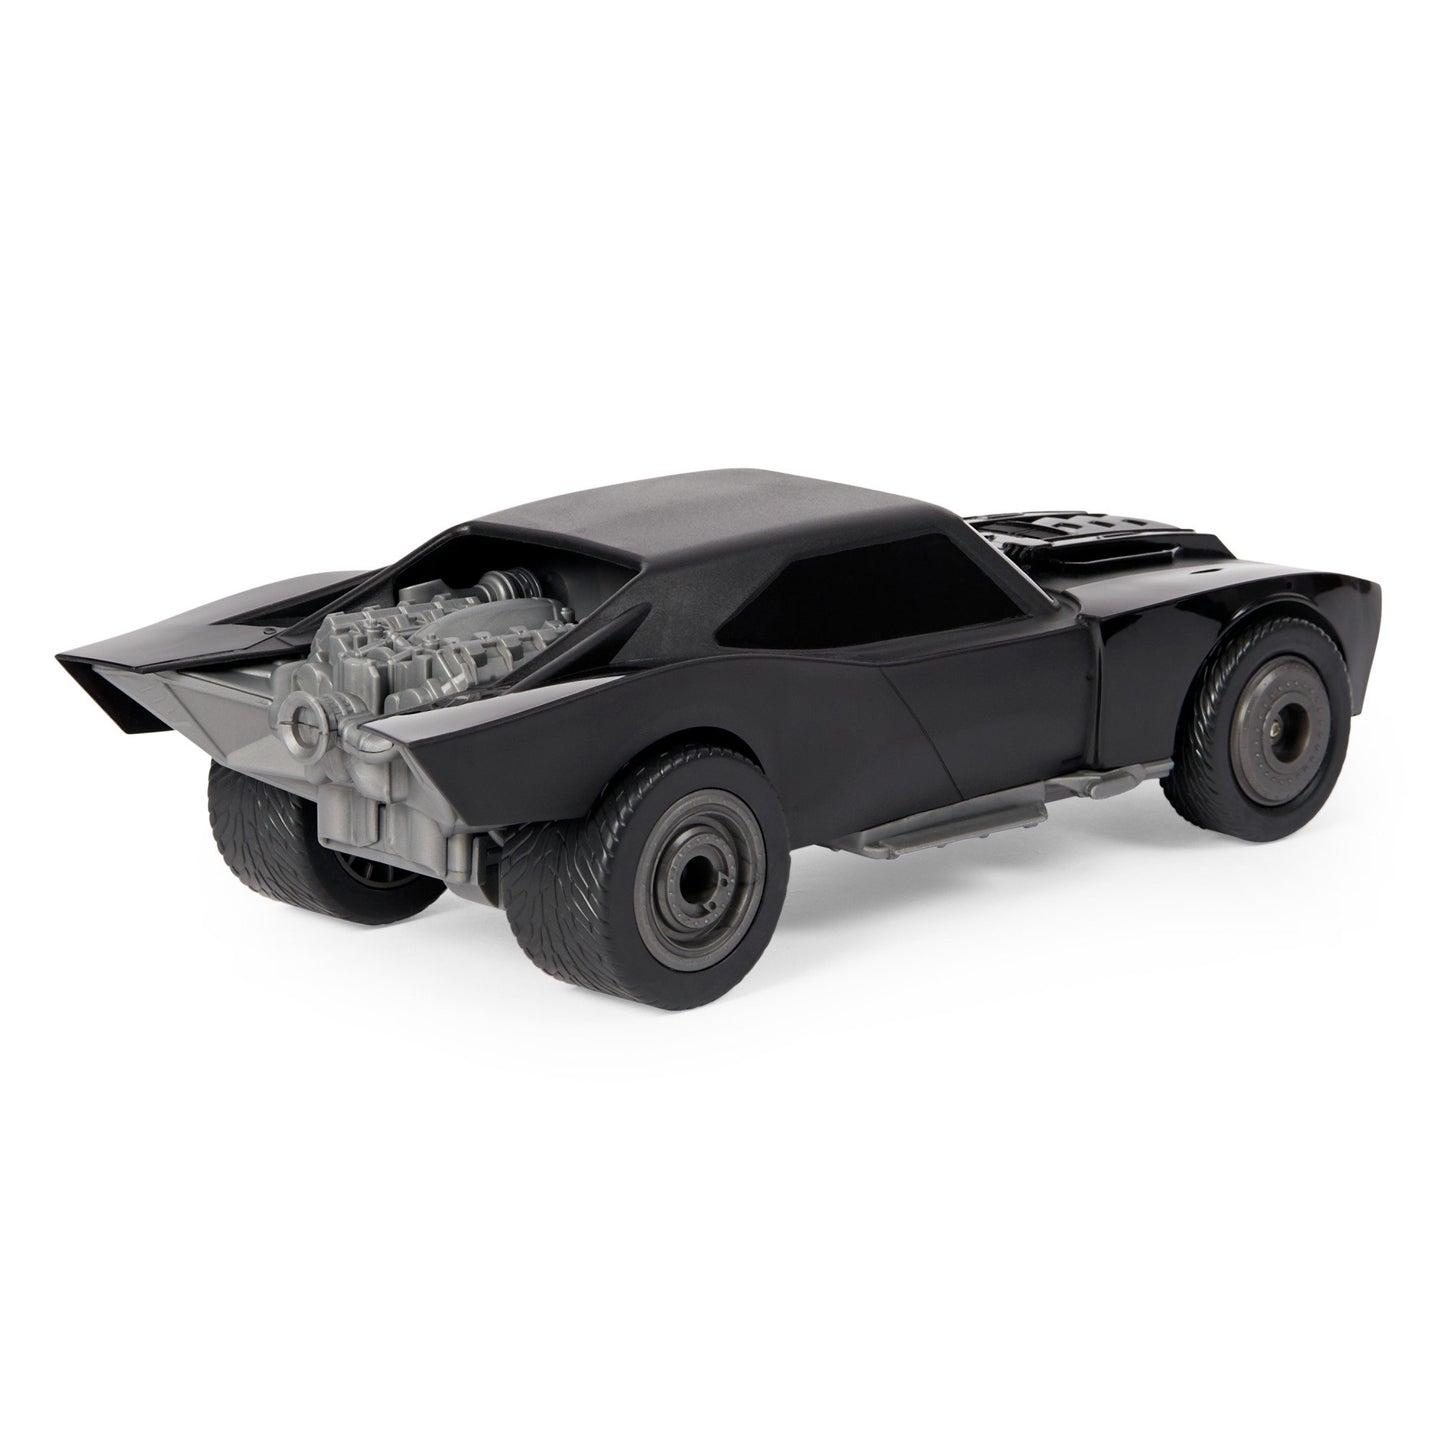 DC Comics, The Batman Batmobile Remote Control Car with Official Batman Movie Styling, Kids Toys for Boys and Girls Ages 4 and Up-Large